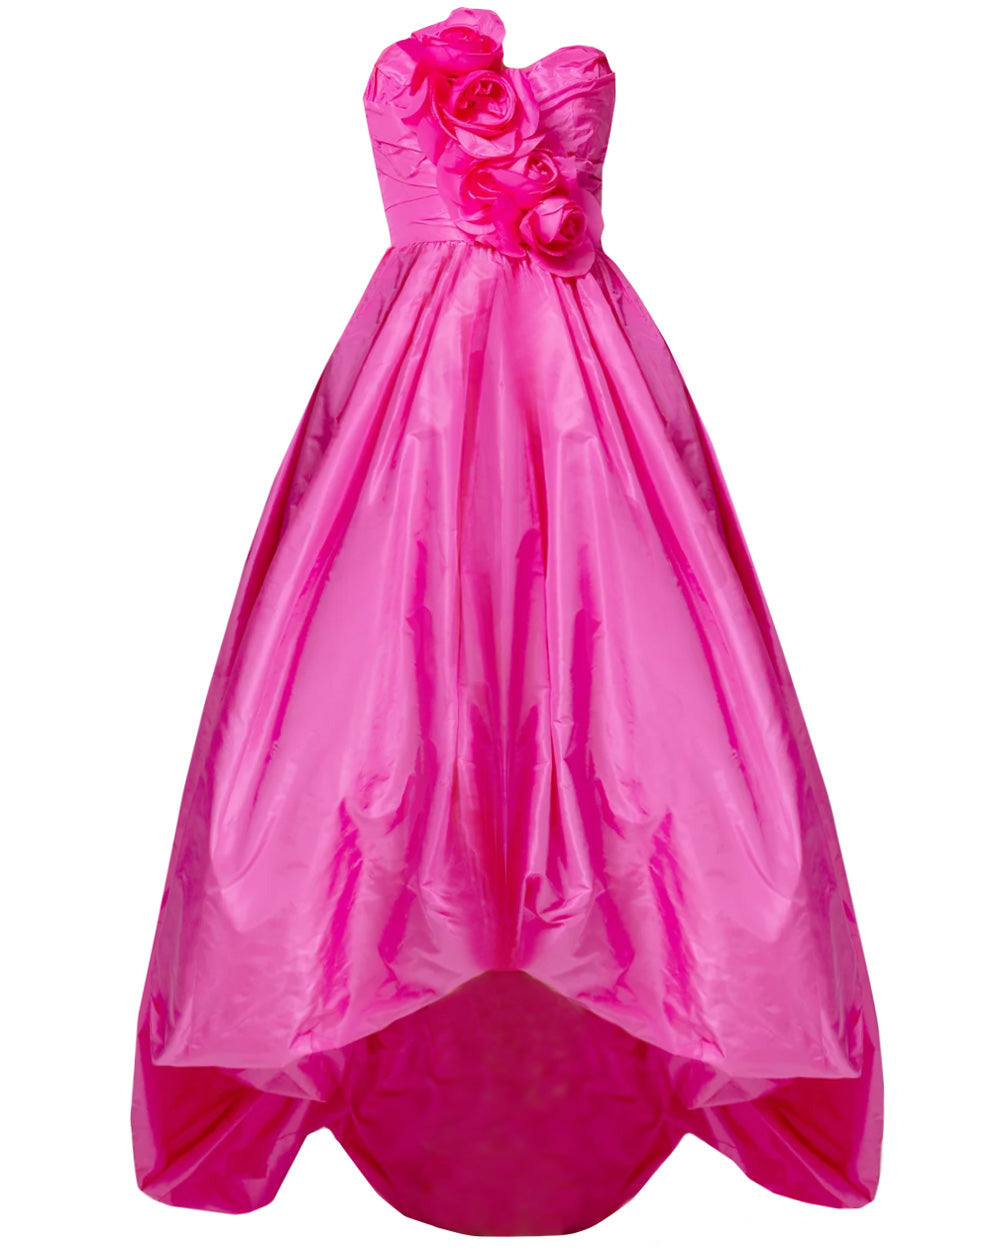 Pink Strapless Rose High Low Gown